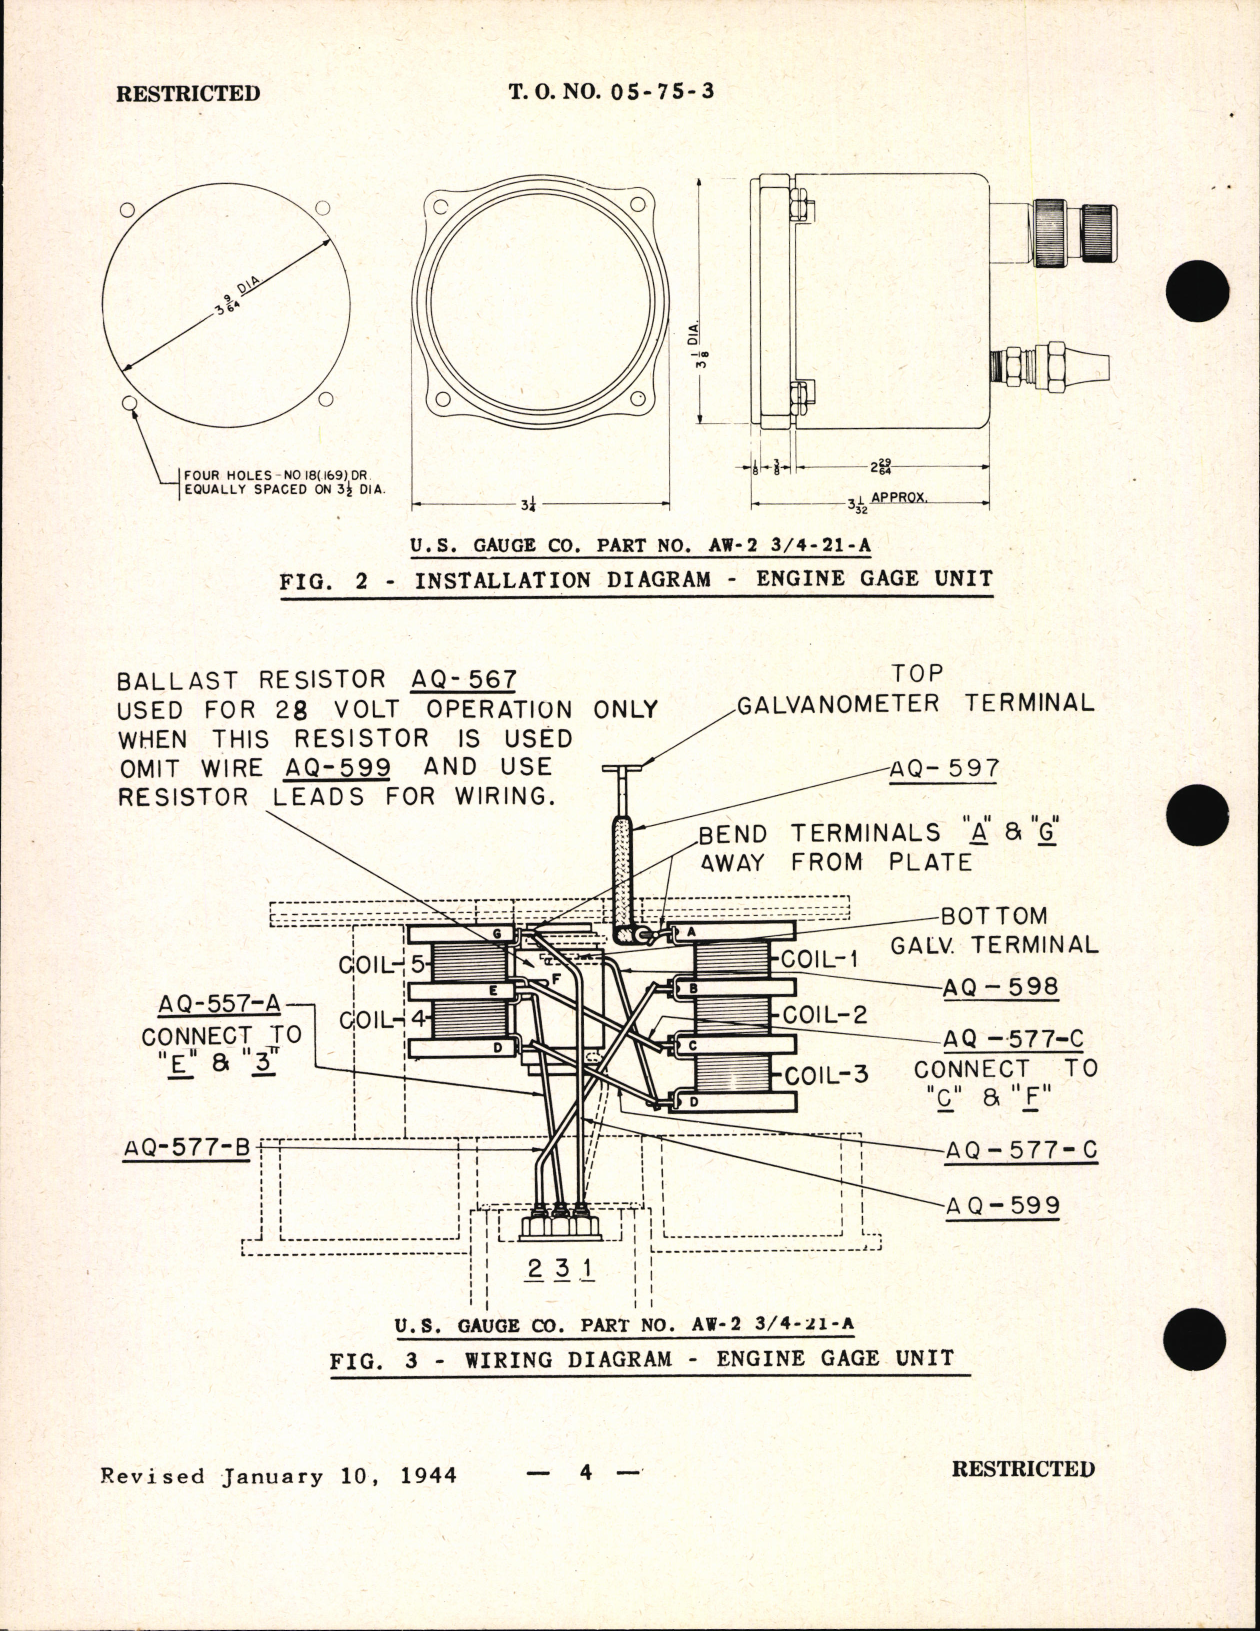 Sample page 6 from AirCorps Library document: Handbook of Instructions with Parts Catalog for Engine Gage Units